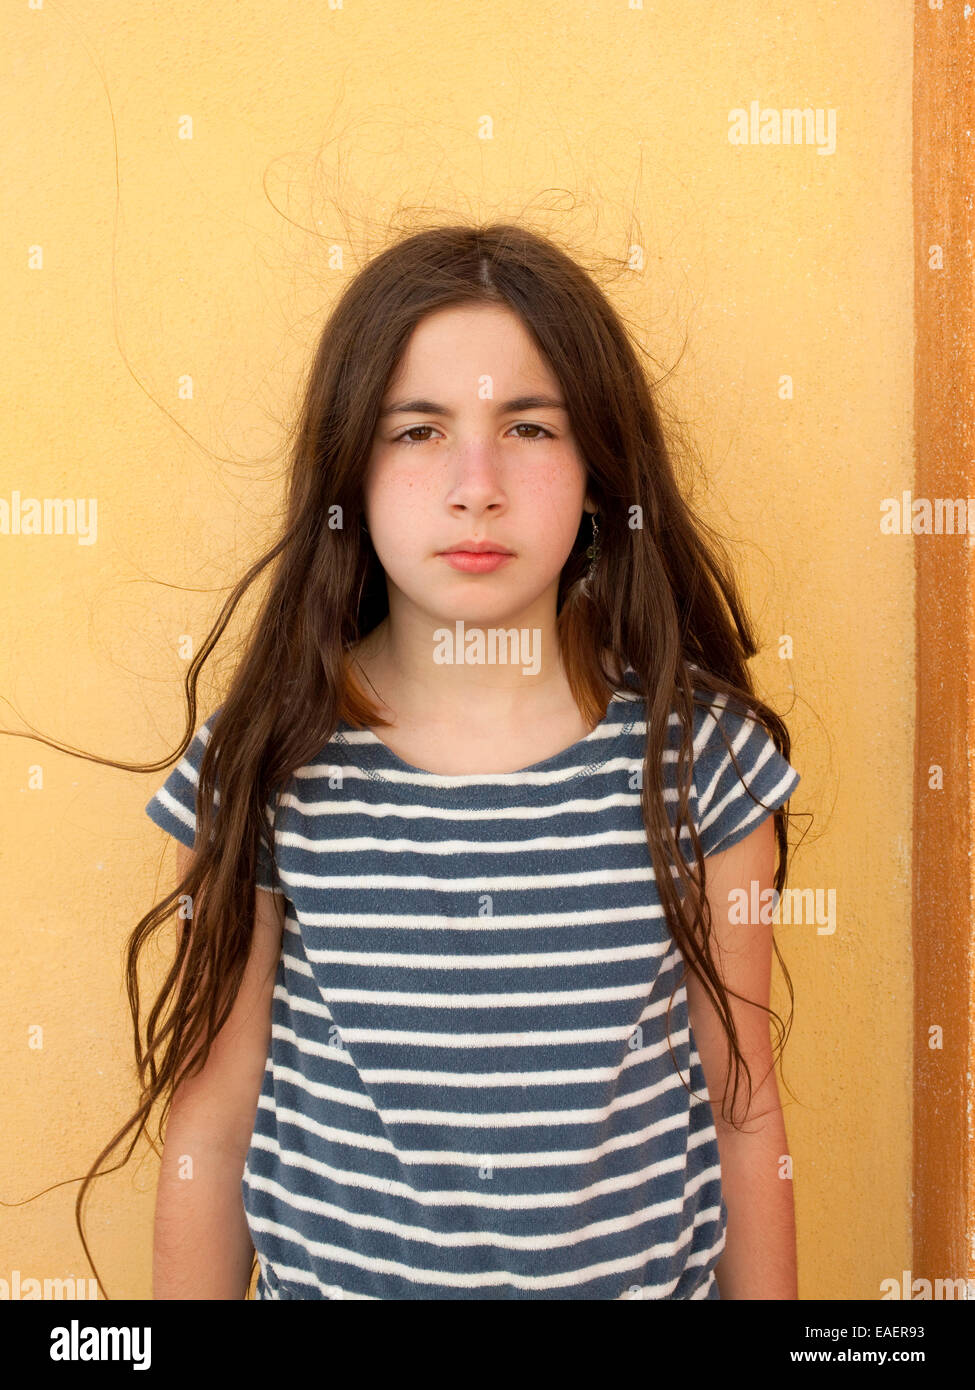 Young Girl with serious expression and frizzy hair Stock Photo